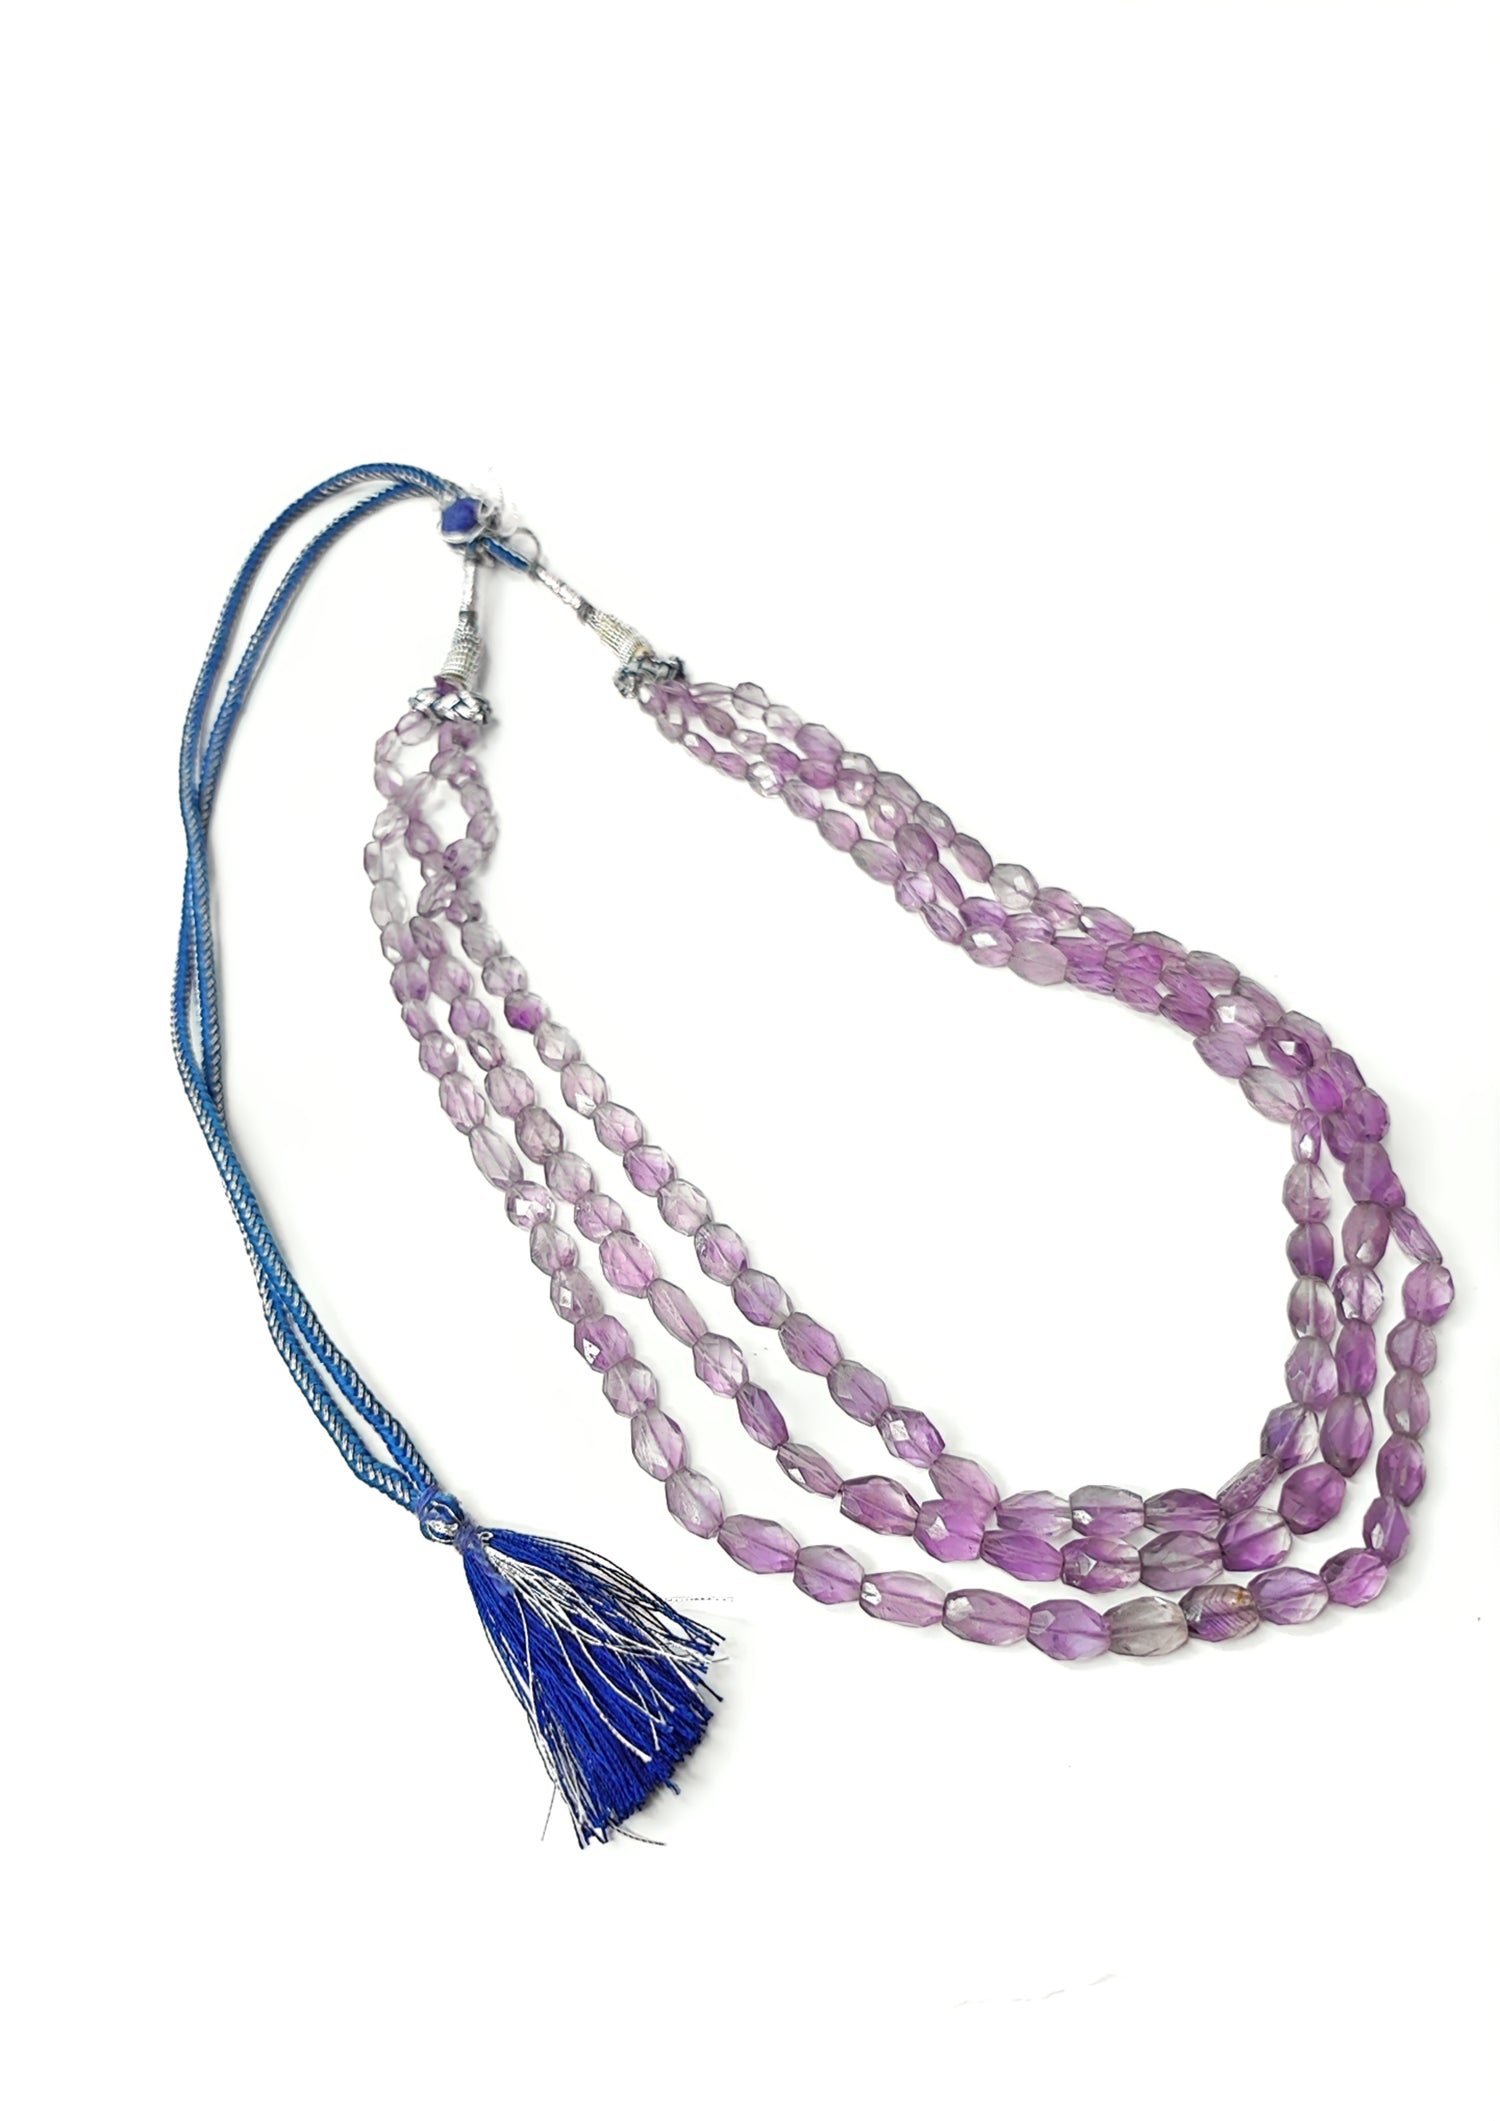 Amethyst Oval Beads Three Layered Necklace